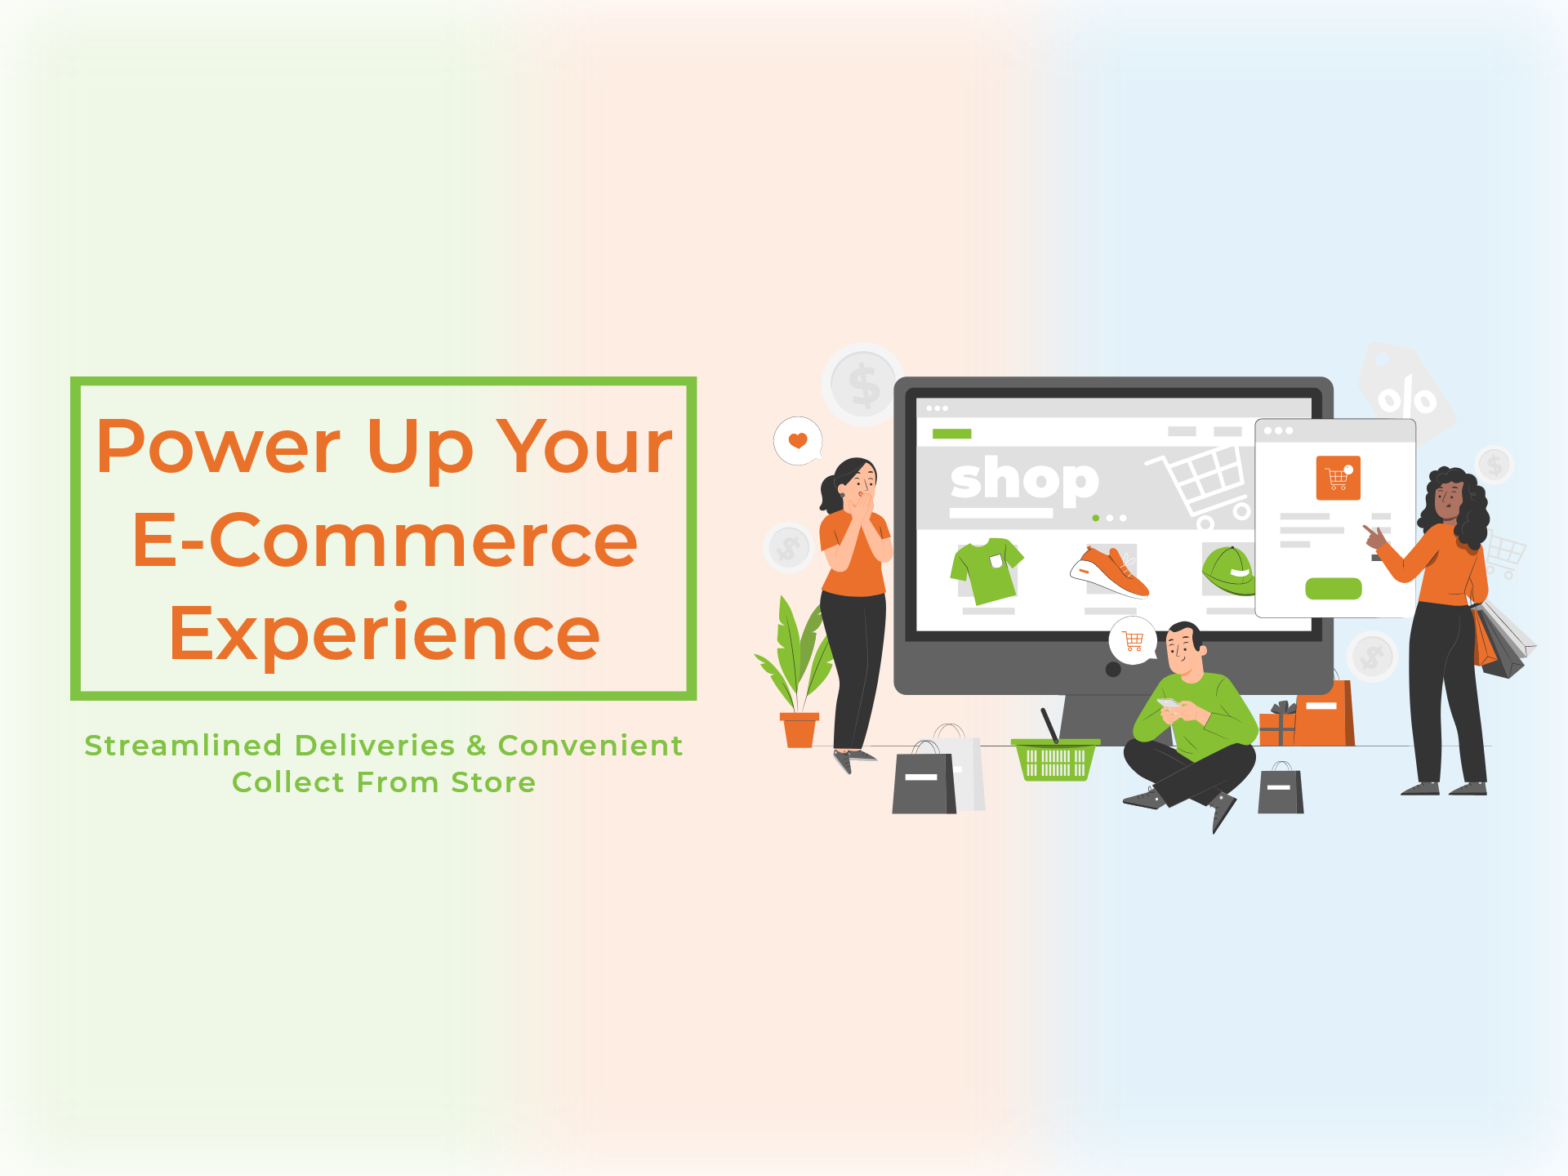 Power Up Your E-commerce Experience